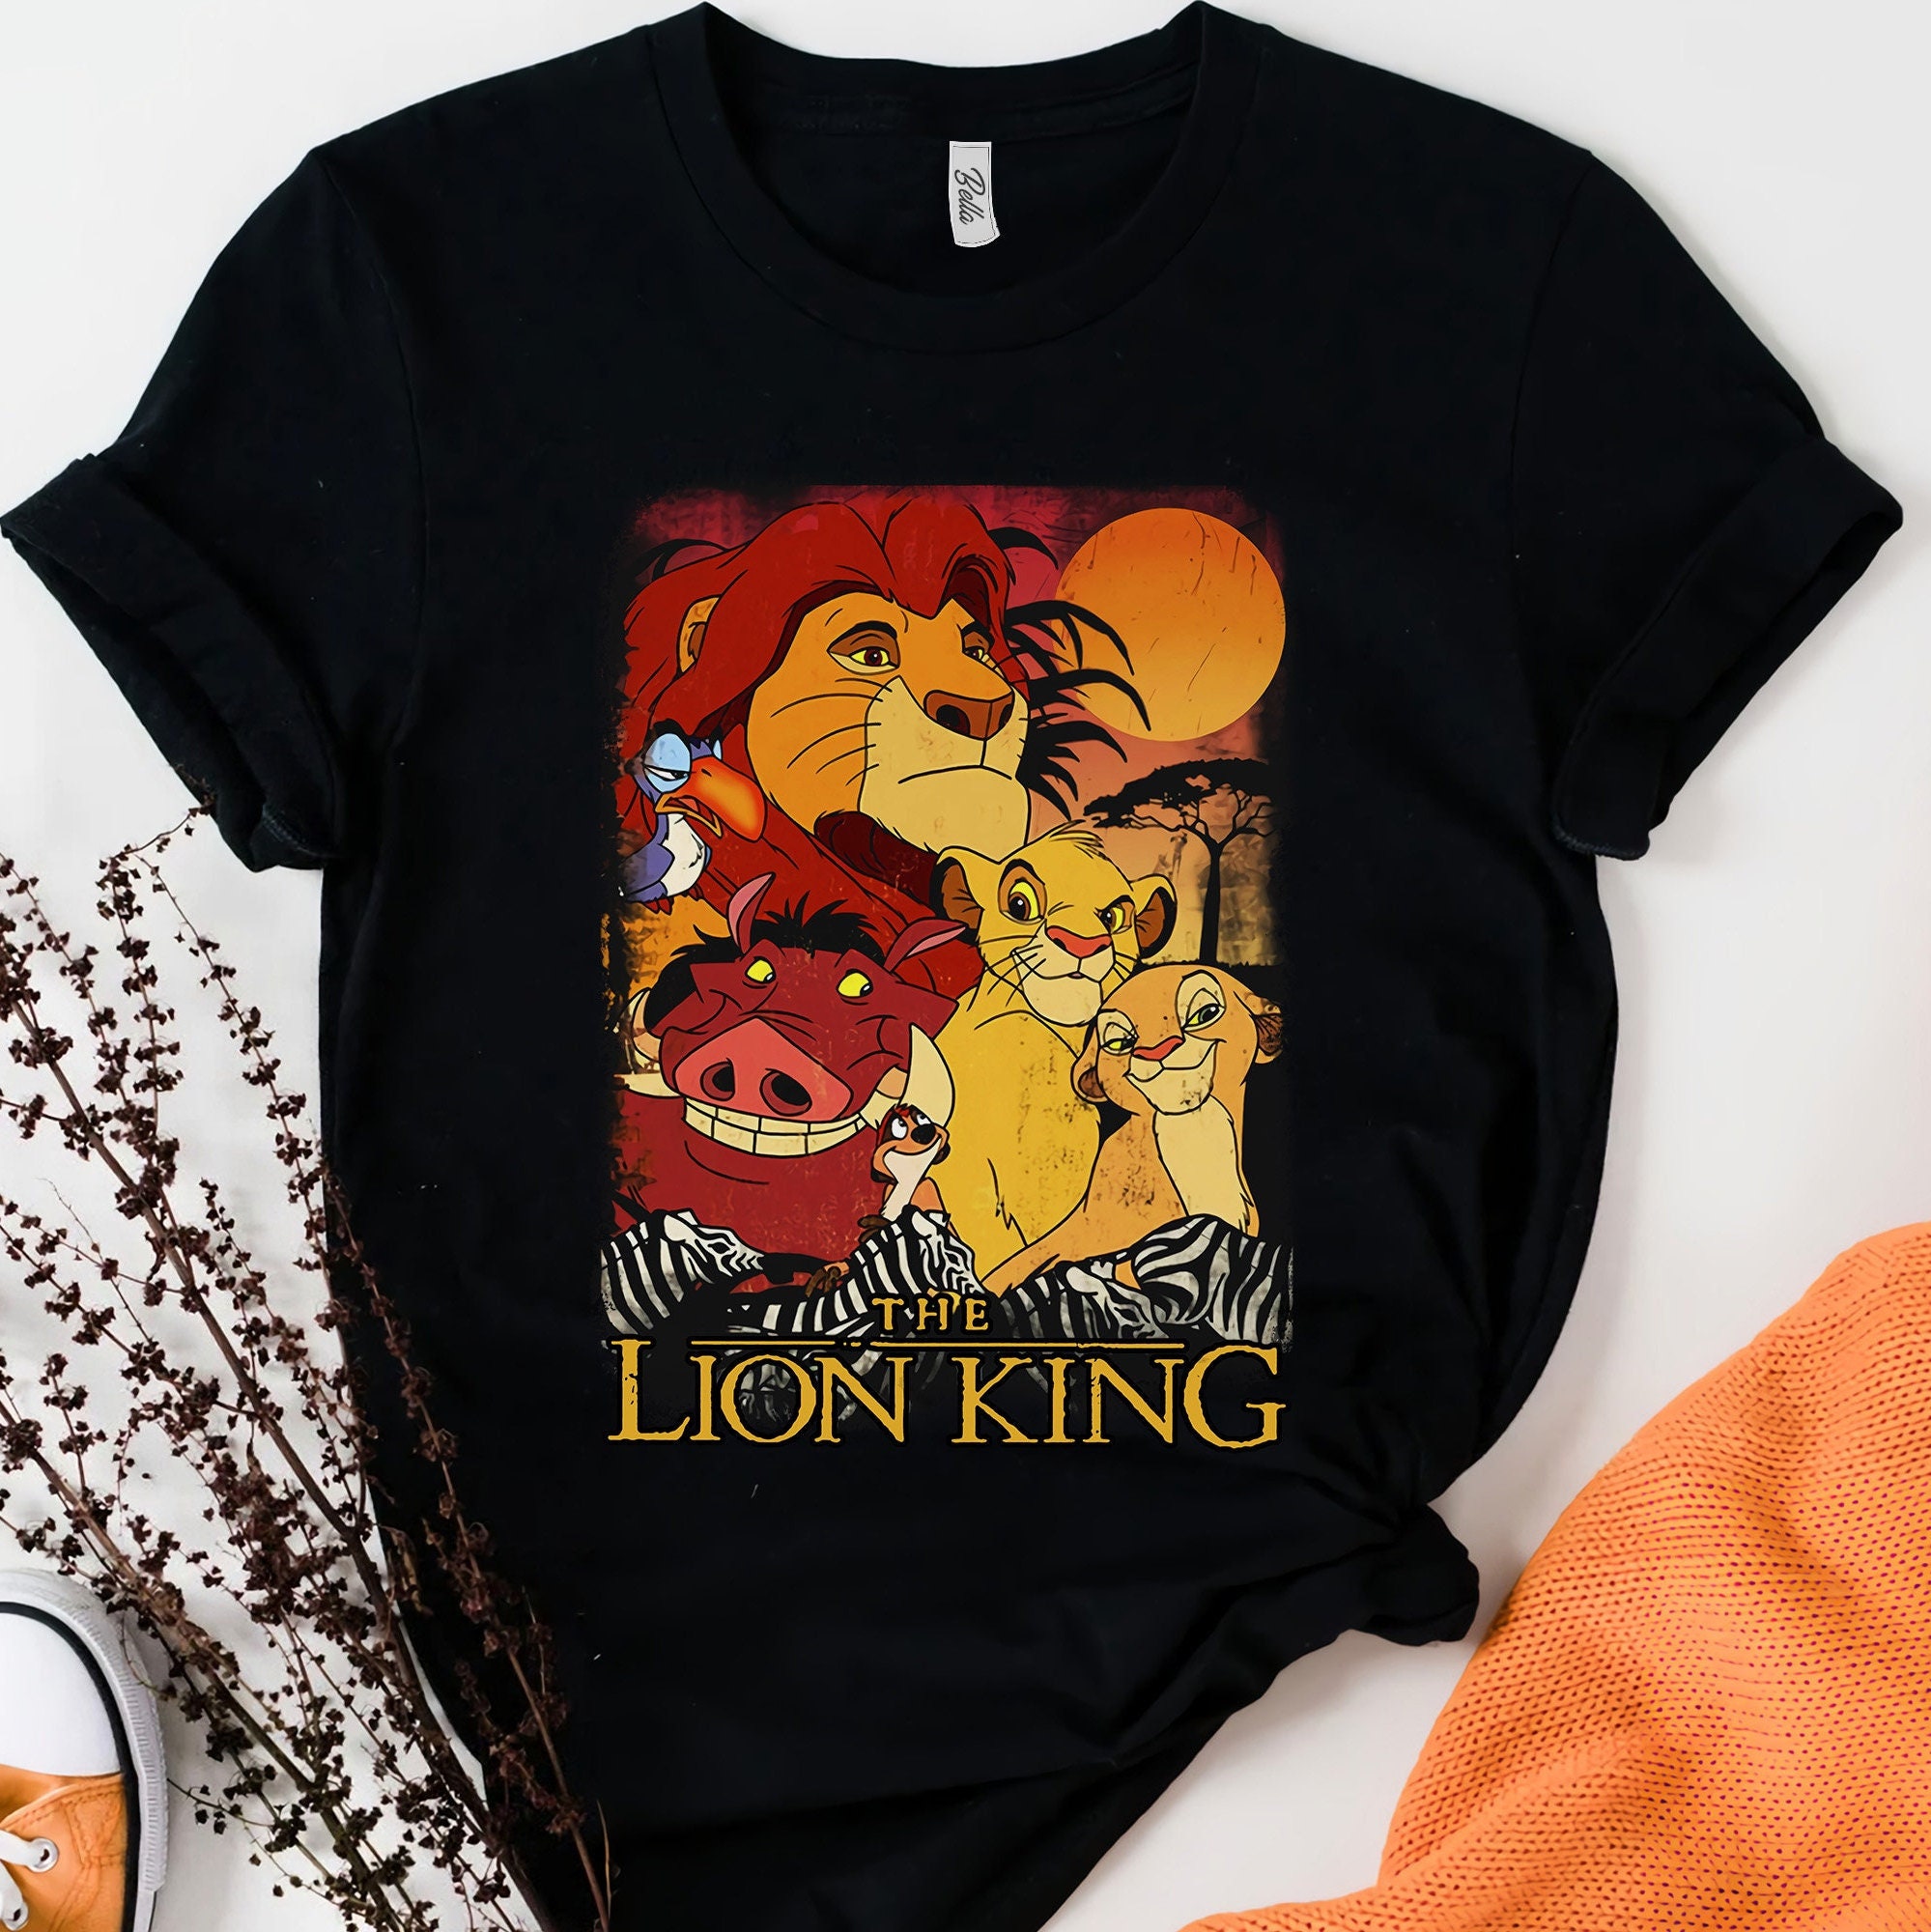 Discover Disney Lion King Group Poster Graphic Vintage T-Shirt, Disneyland Vacation Gift Unisex T-shirt Family Birthday Gift Adult Kid Toddler Tee